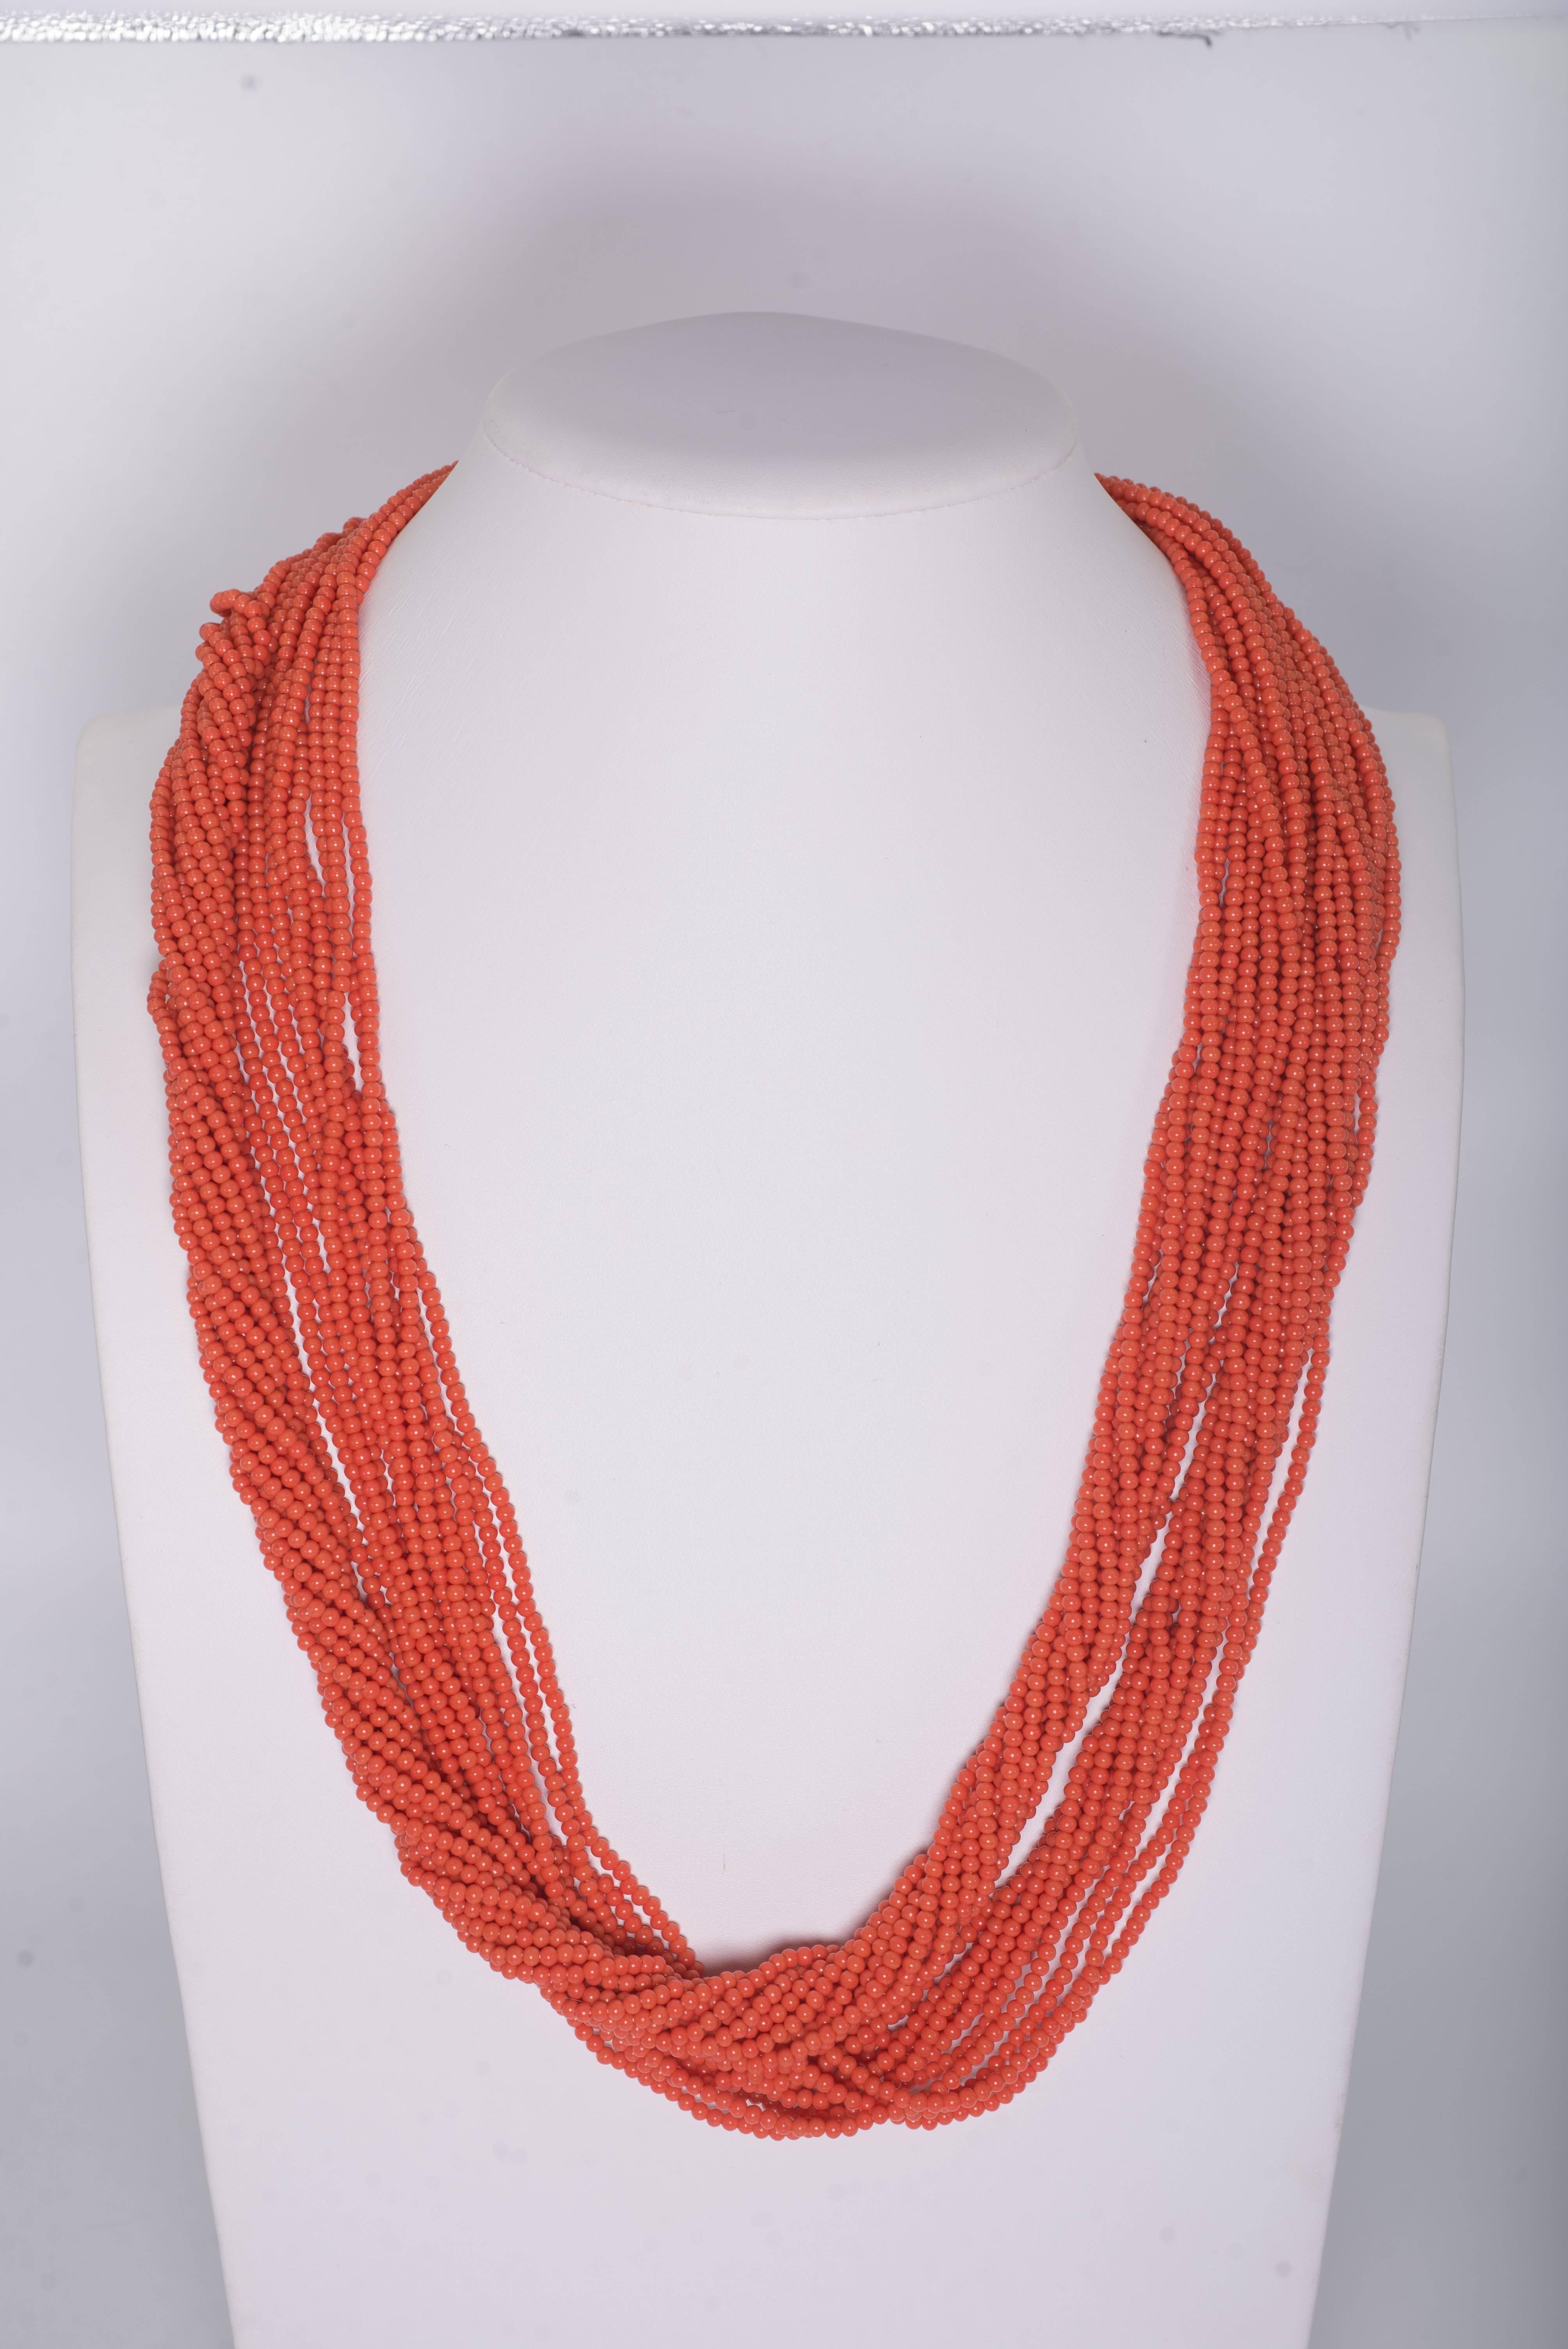 Fabulous faux 60 inch long vintage coral 4mm bead twist necklace that can be wrapped as many times as you want. So versatile and chic. Gorgeous soft coral color.
Pave cubic zirconia vermeil ball screw clasp.
Vintage handmade Japanese beads.